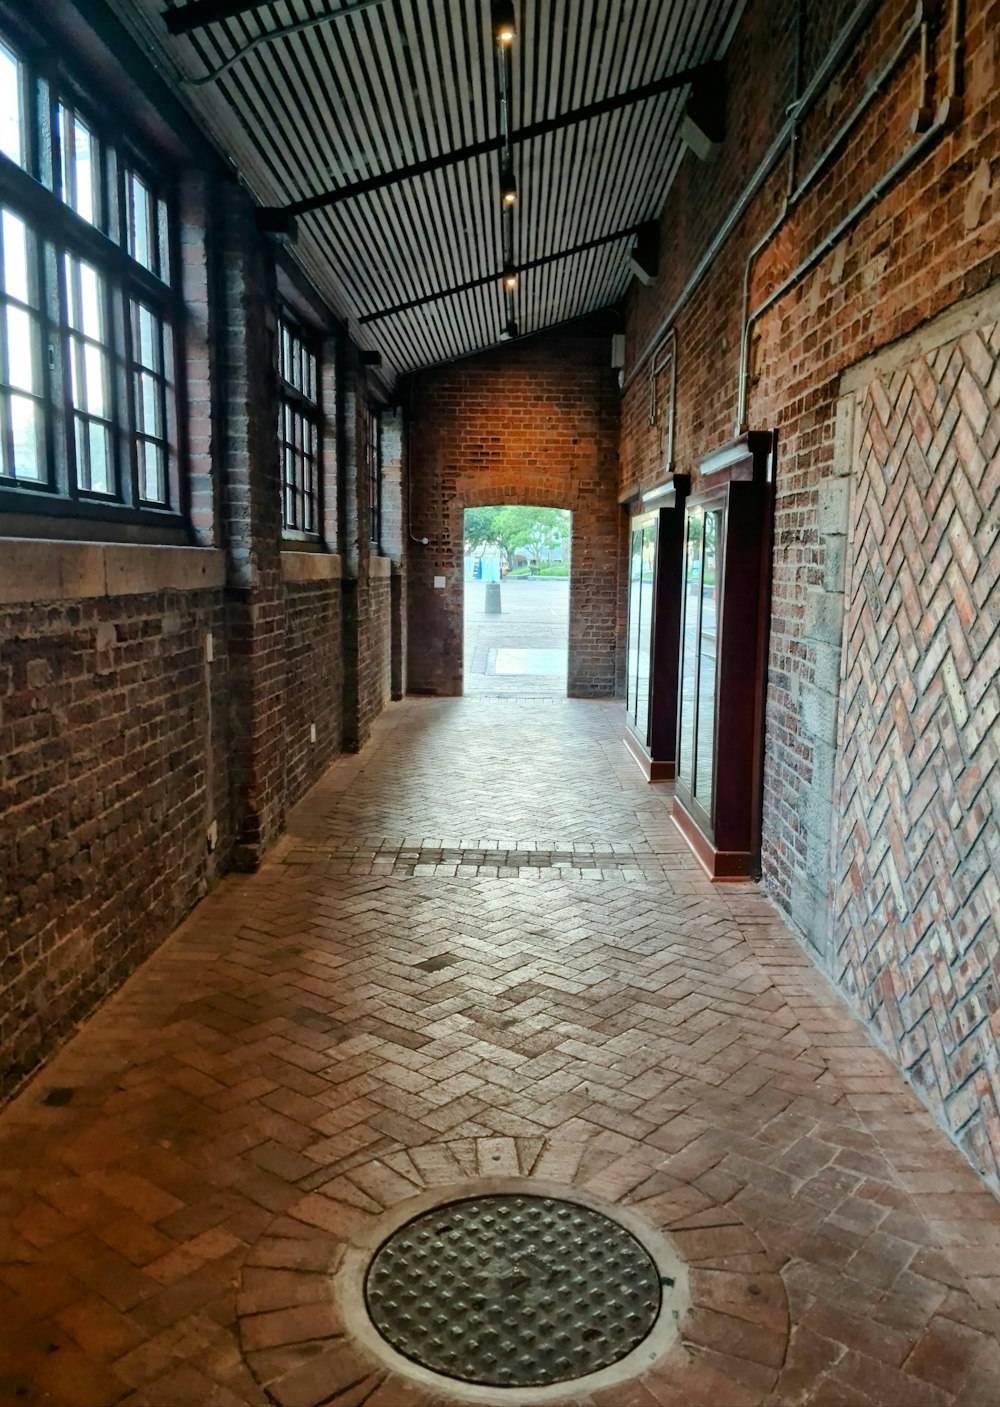 a brick walkway with a manhole in the middle of it